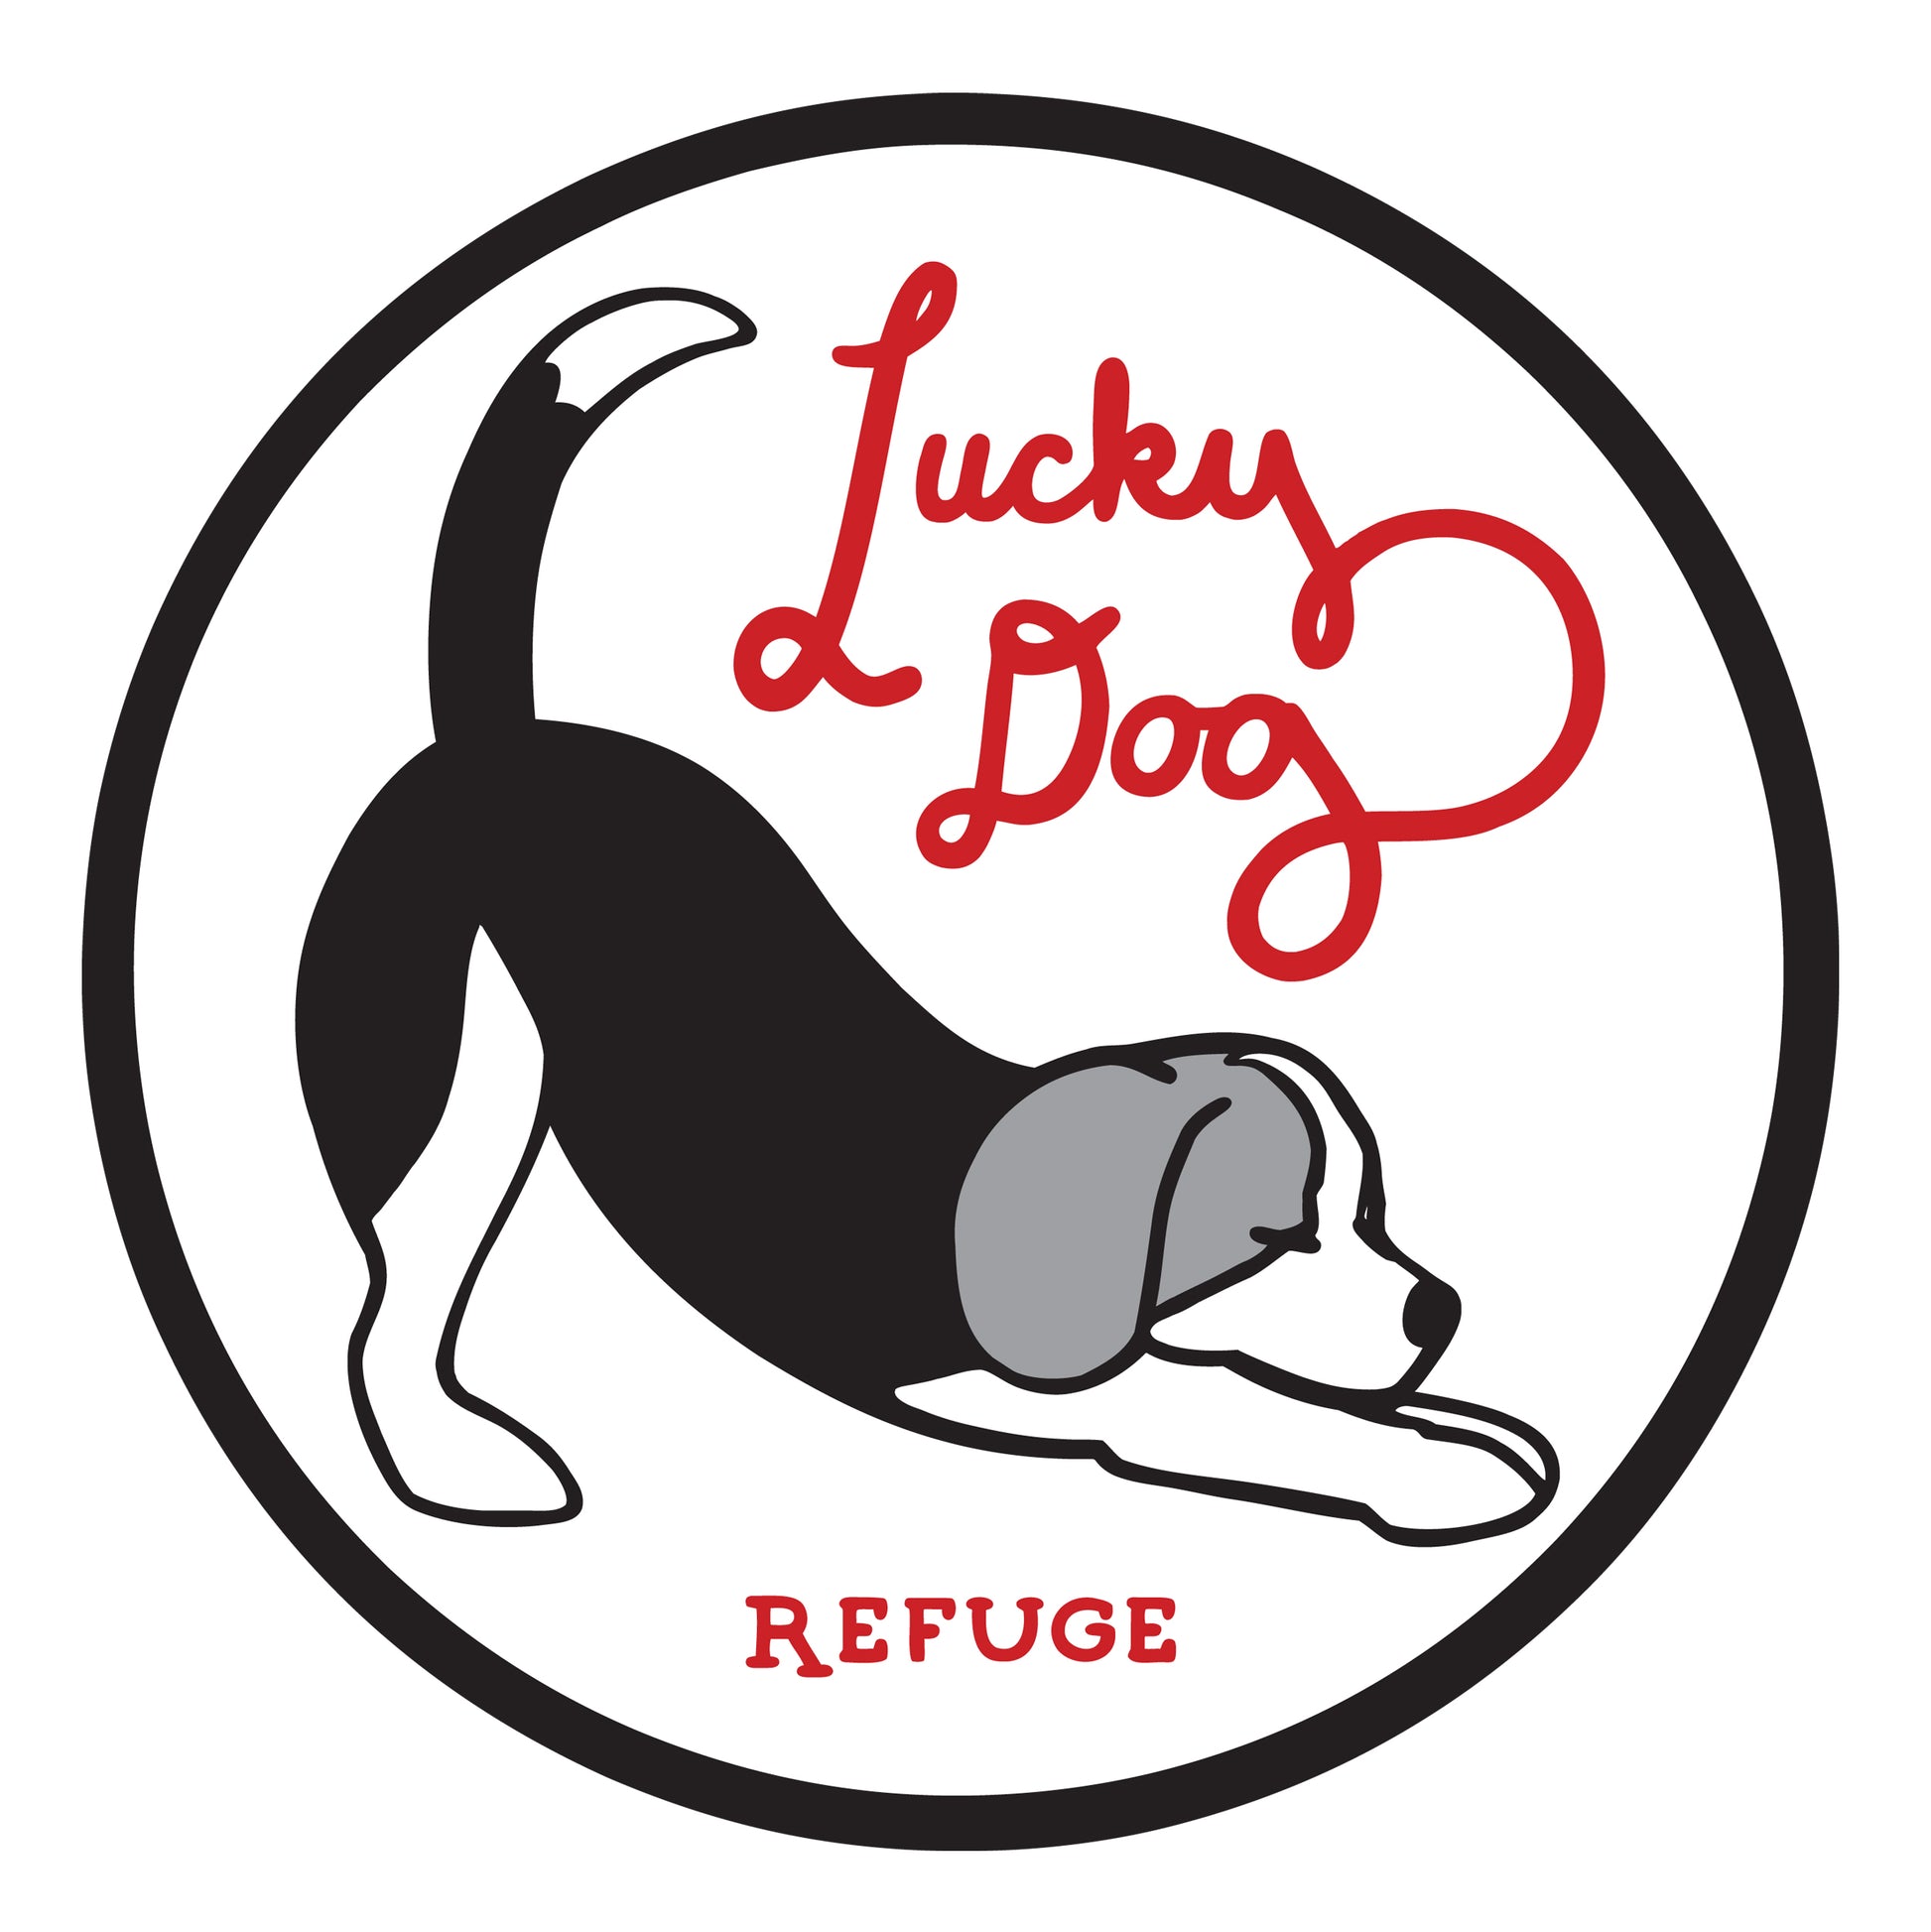 Lucky Dog Refuge in Stamford, 501 | Clear The Shelters 2022 image